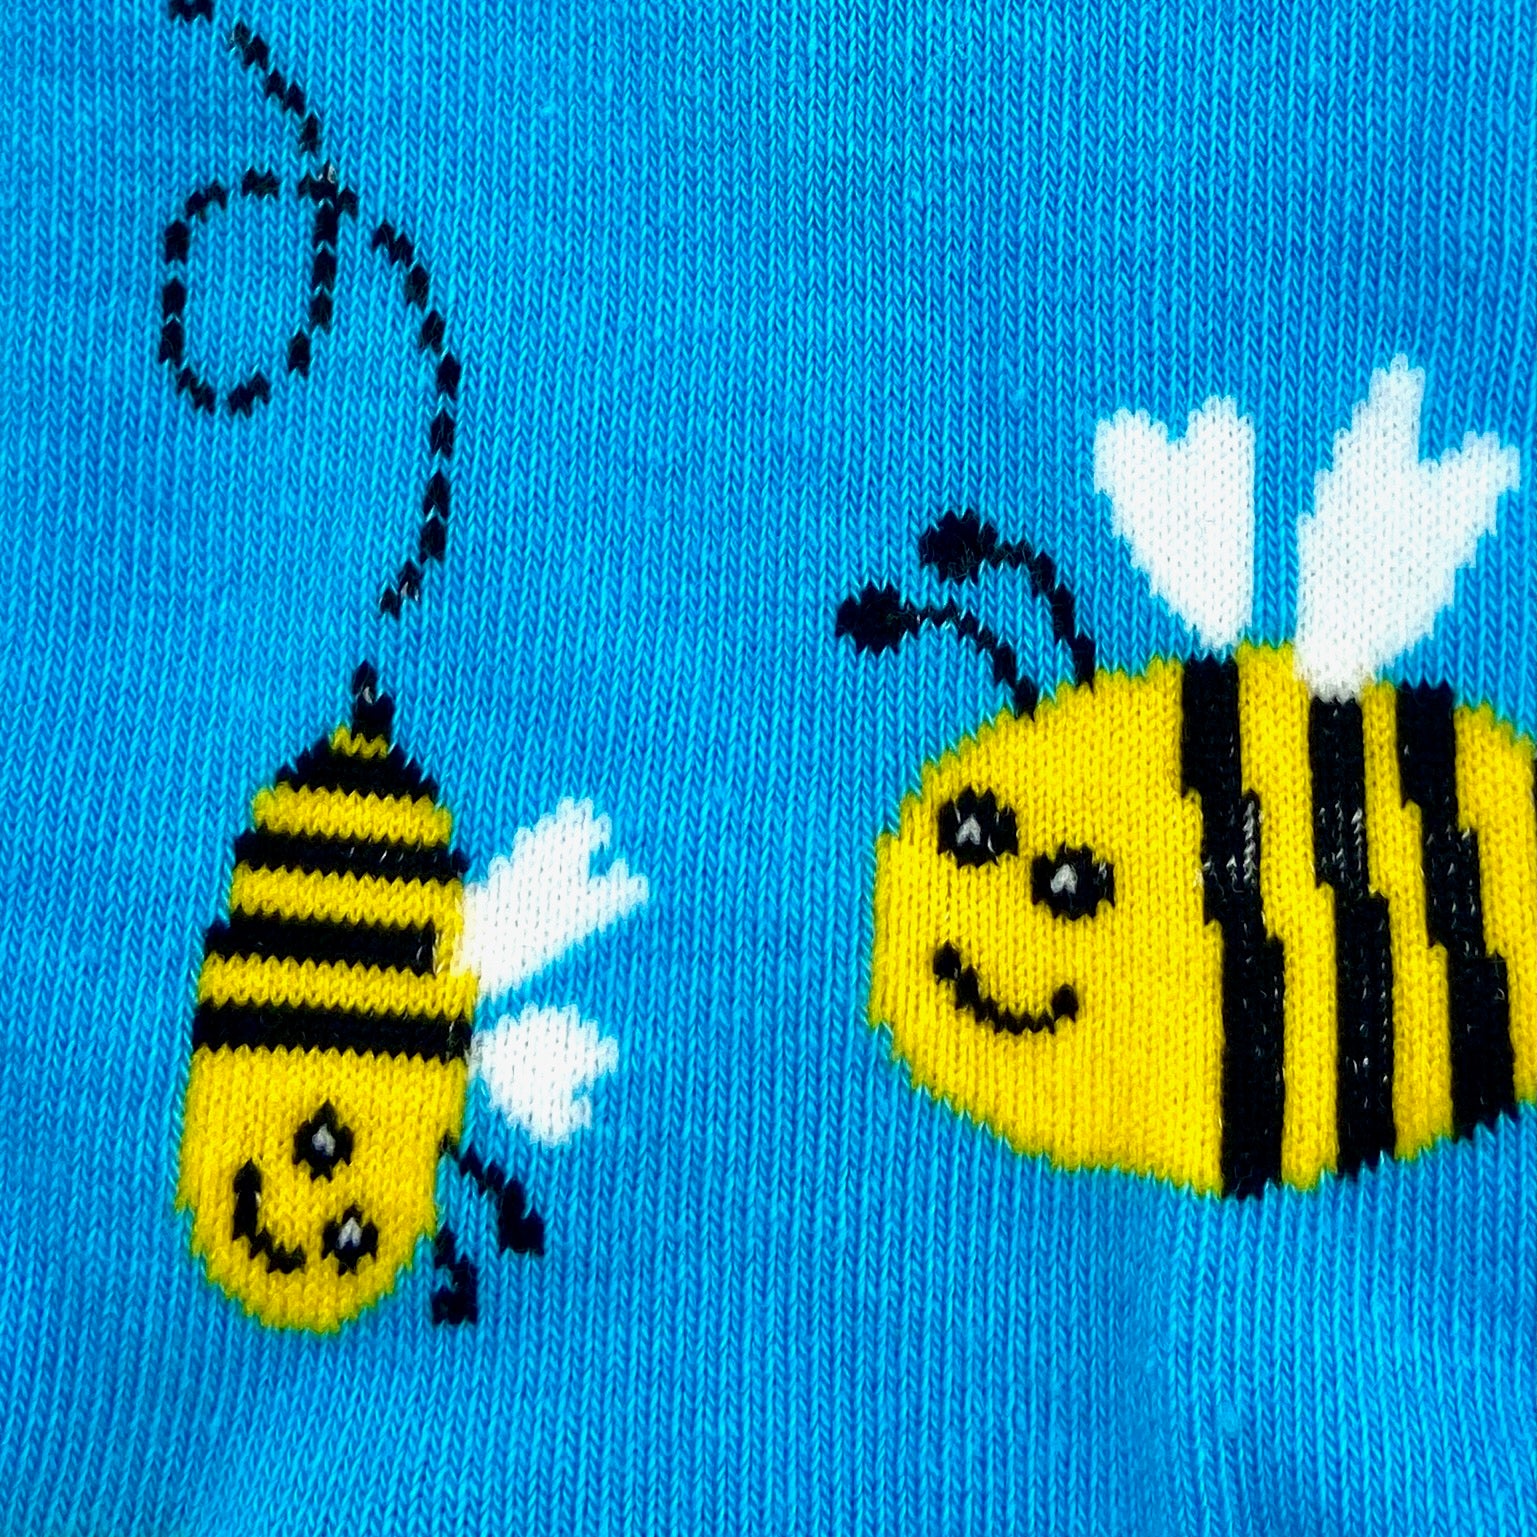 Bright Blue Bumble Bee All Over Print Comfy Stretch Novelty Crew Socks